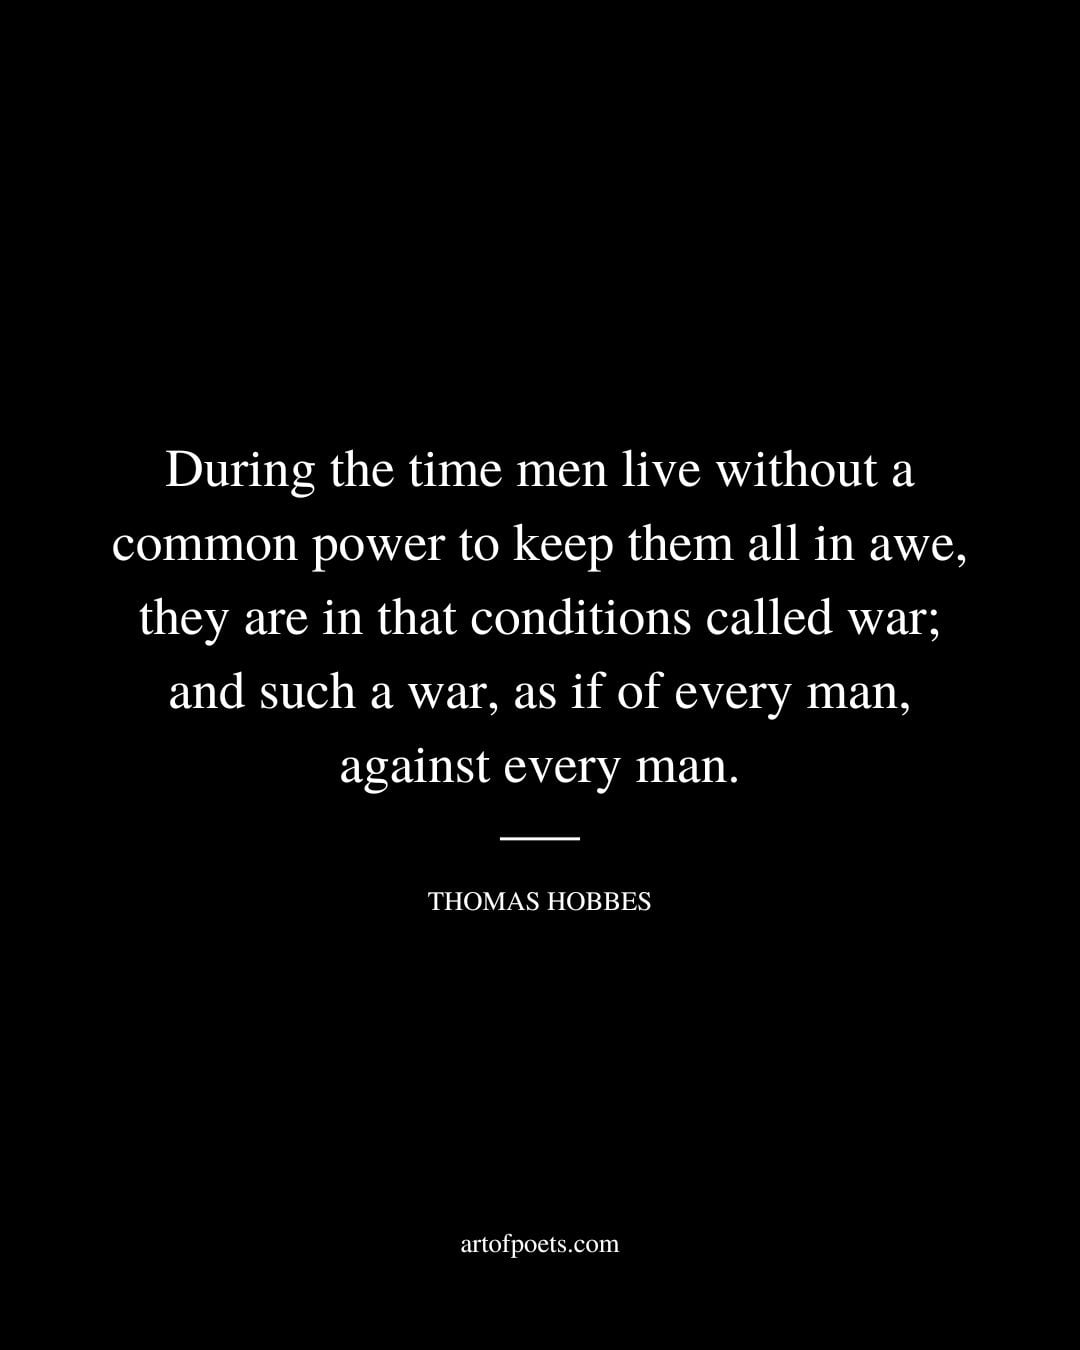 During the time men live without a common power to keep them all in awe they are in that conditions called war and such a war as if of every man against every man